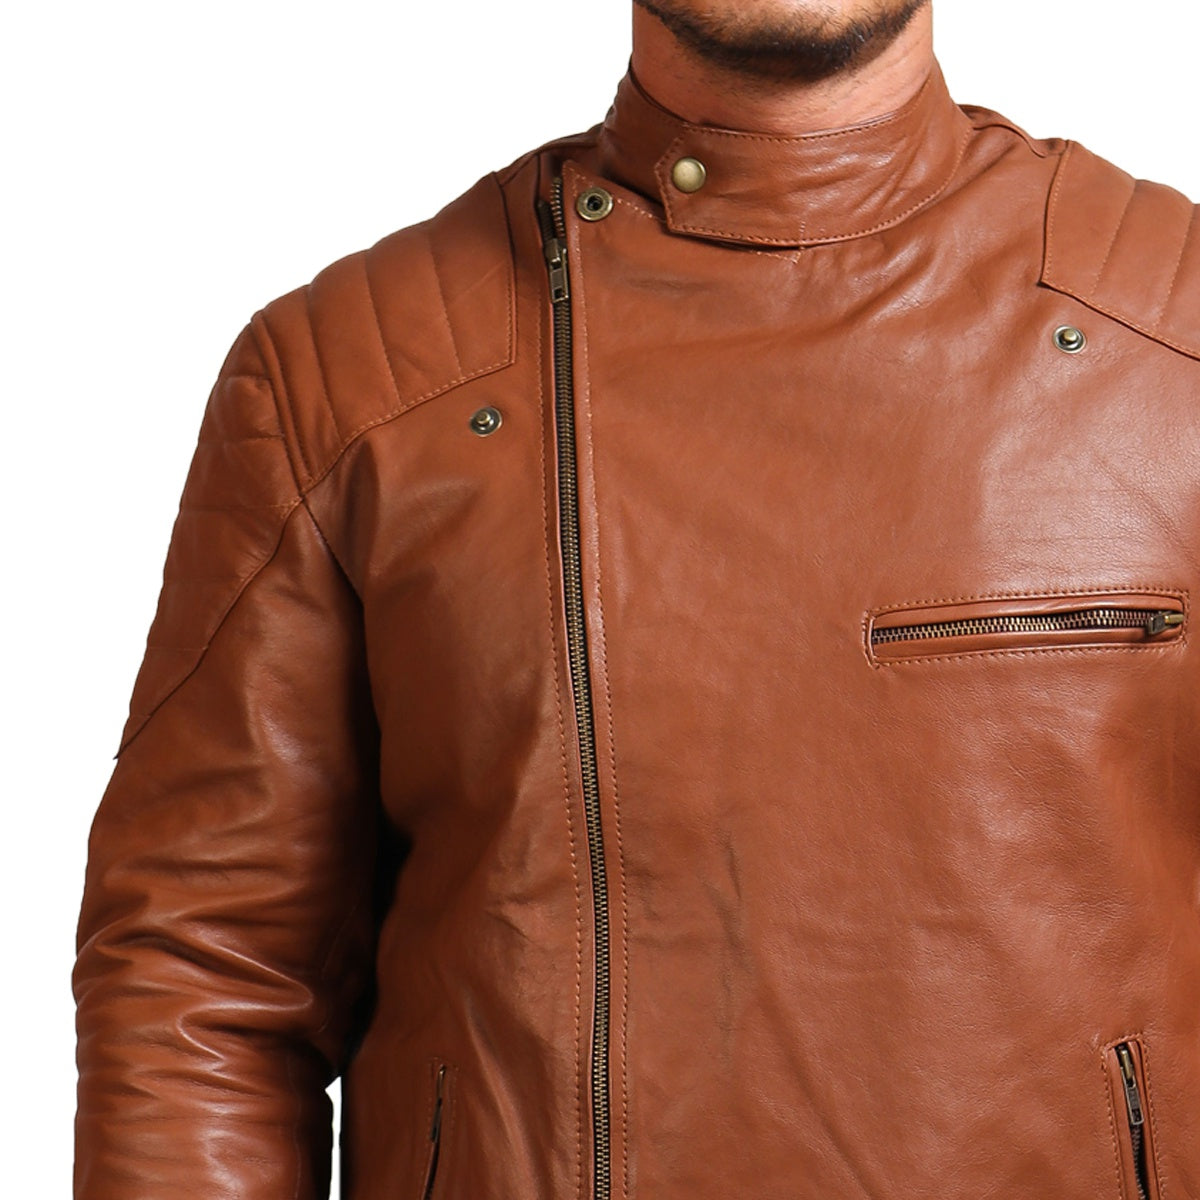 Men's Motorcycle Faux Leather Brown Jacket